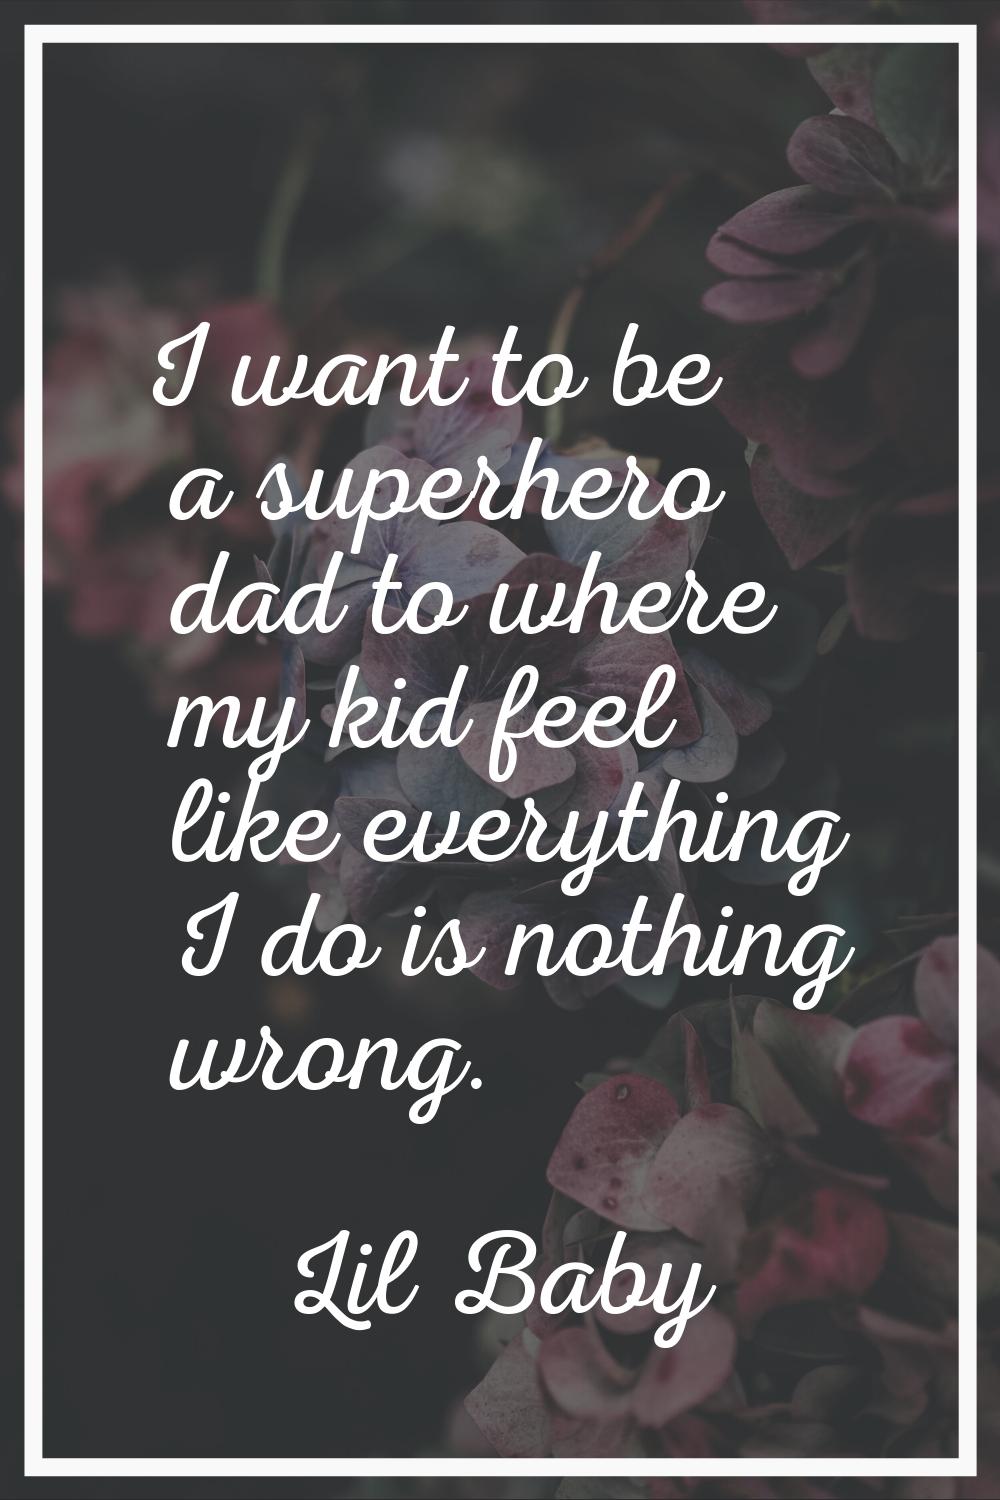 I want to be a superhero dad to where my kid feel like everything I do is nothing wrong.